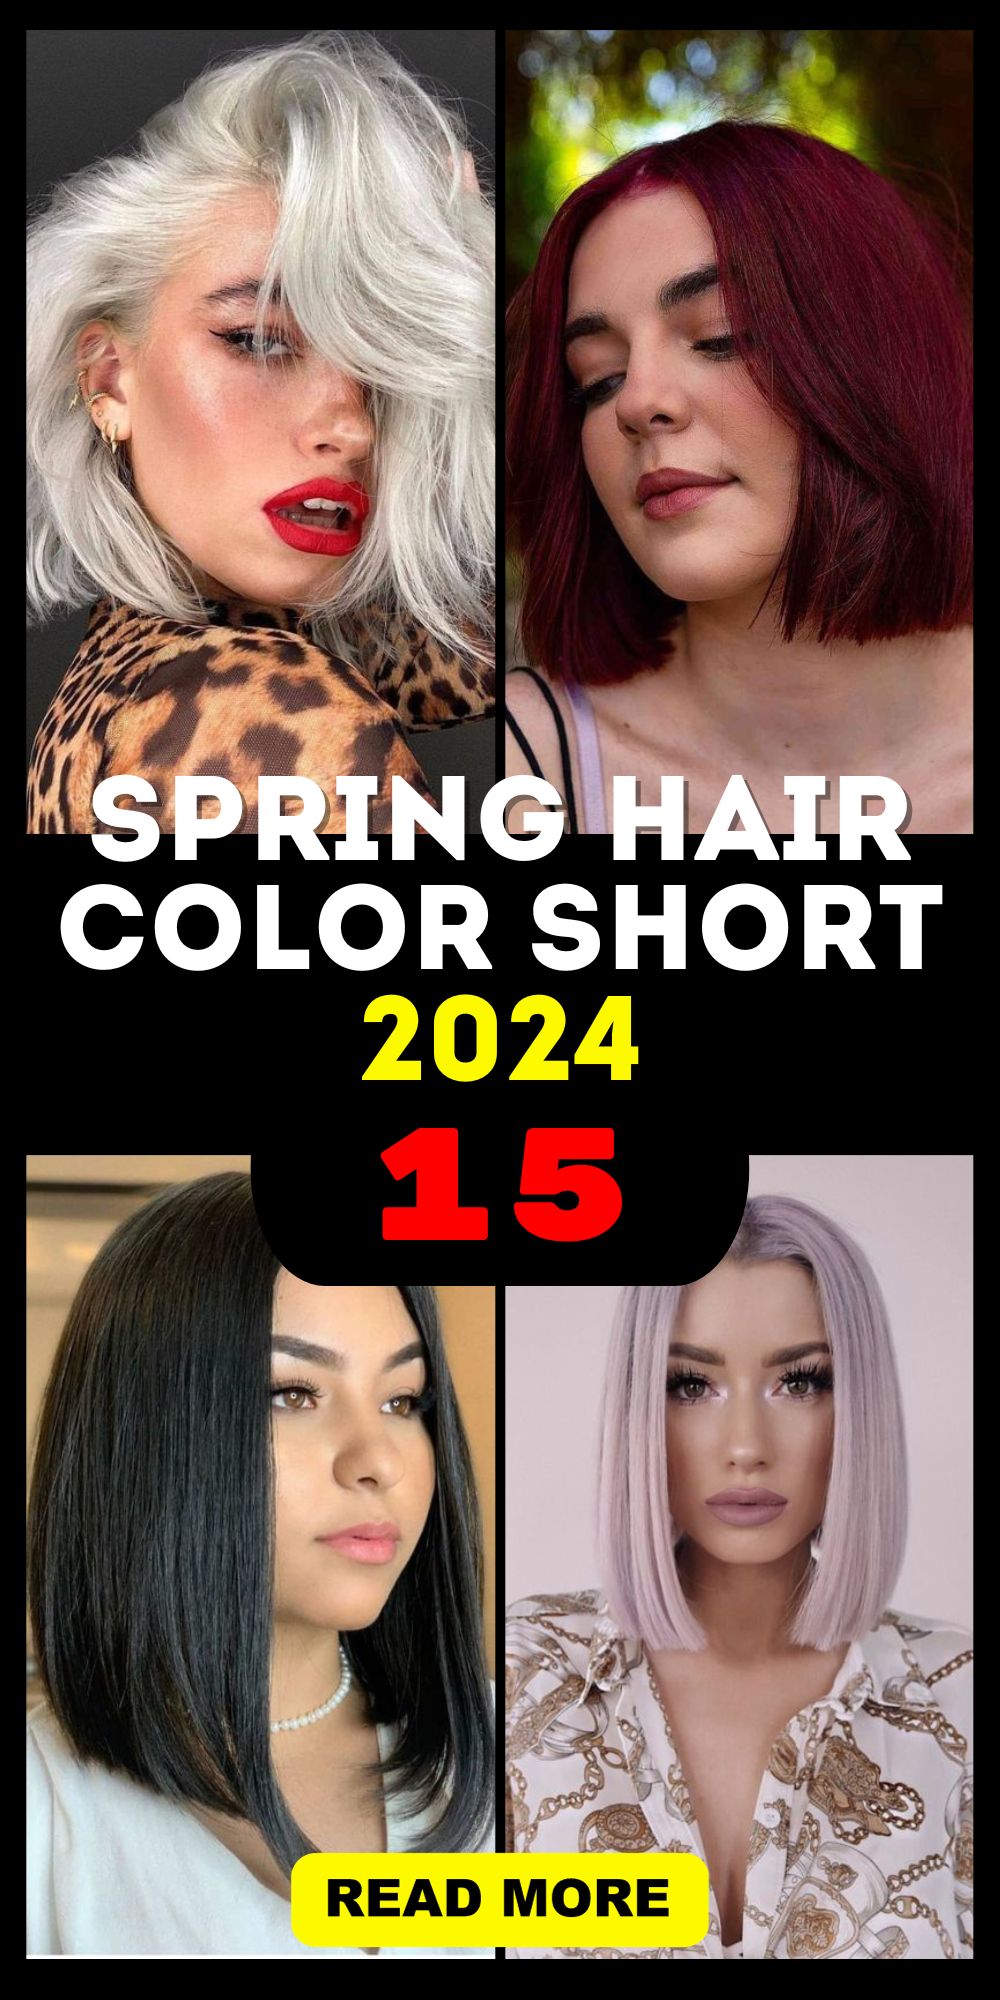 Revamp Your Look Spring Hair Color Trends for Short Hair 2024